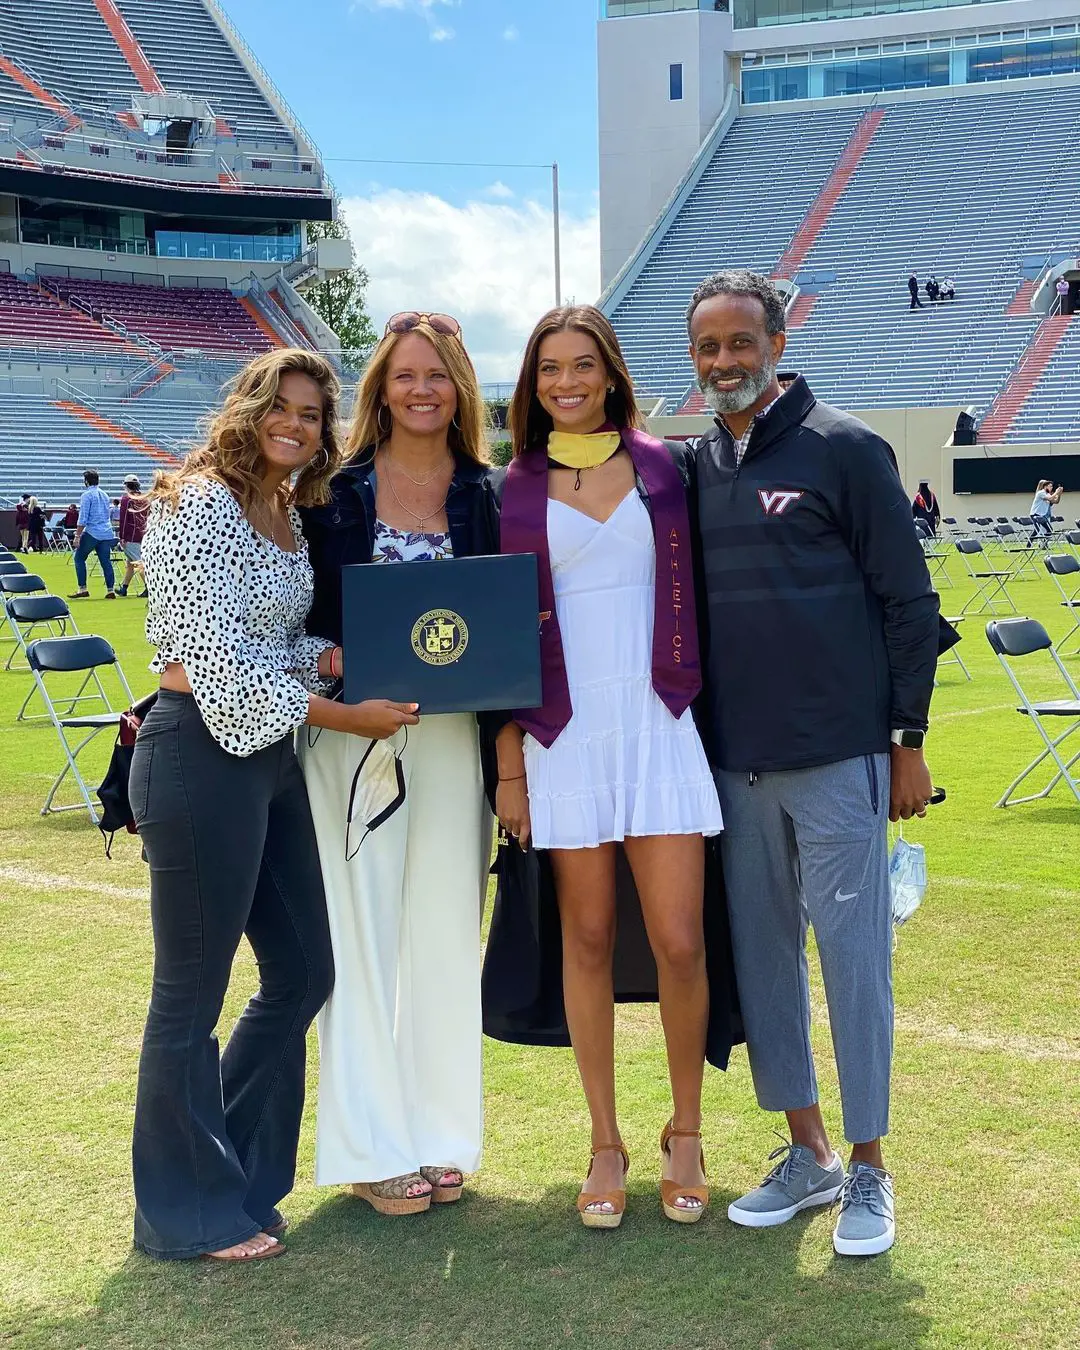 Kendyl during her graduation ceremony from Virginia Tech in May 2021